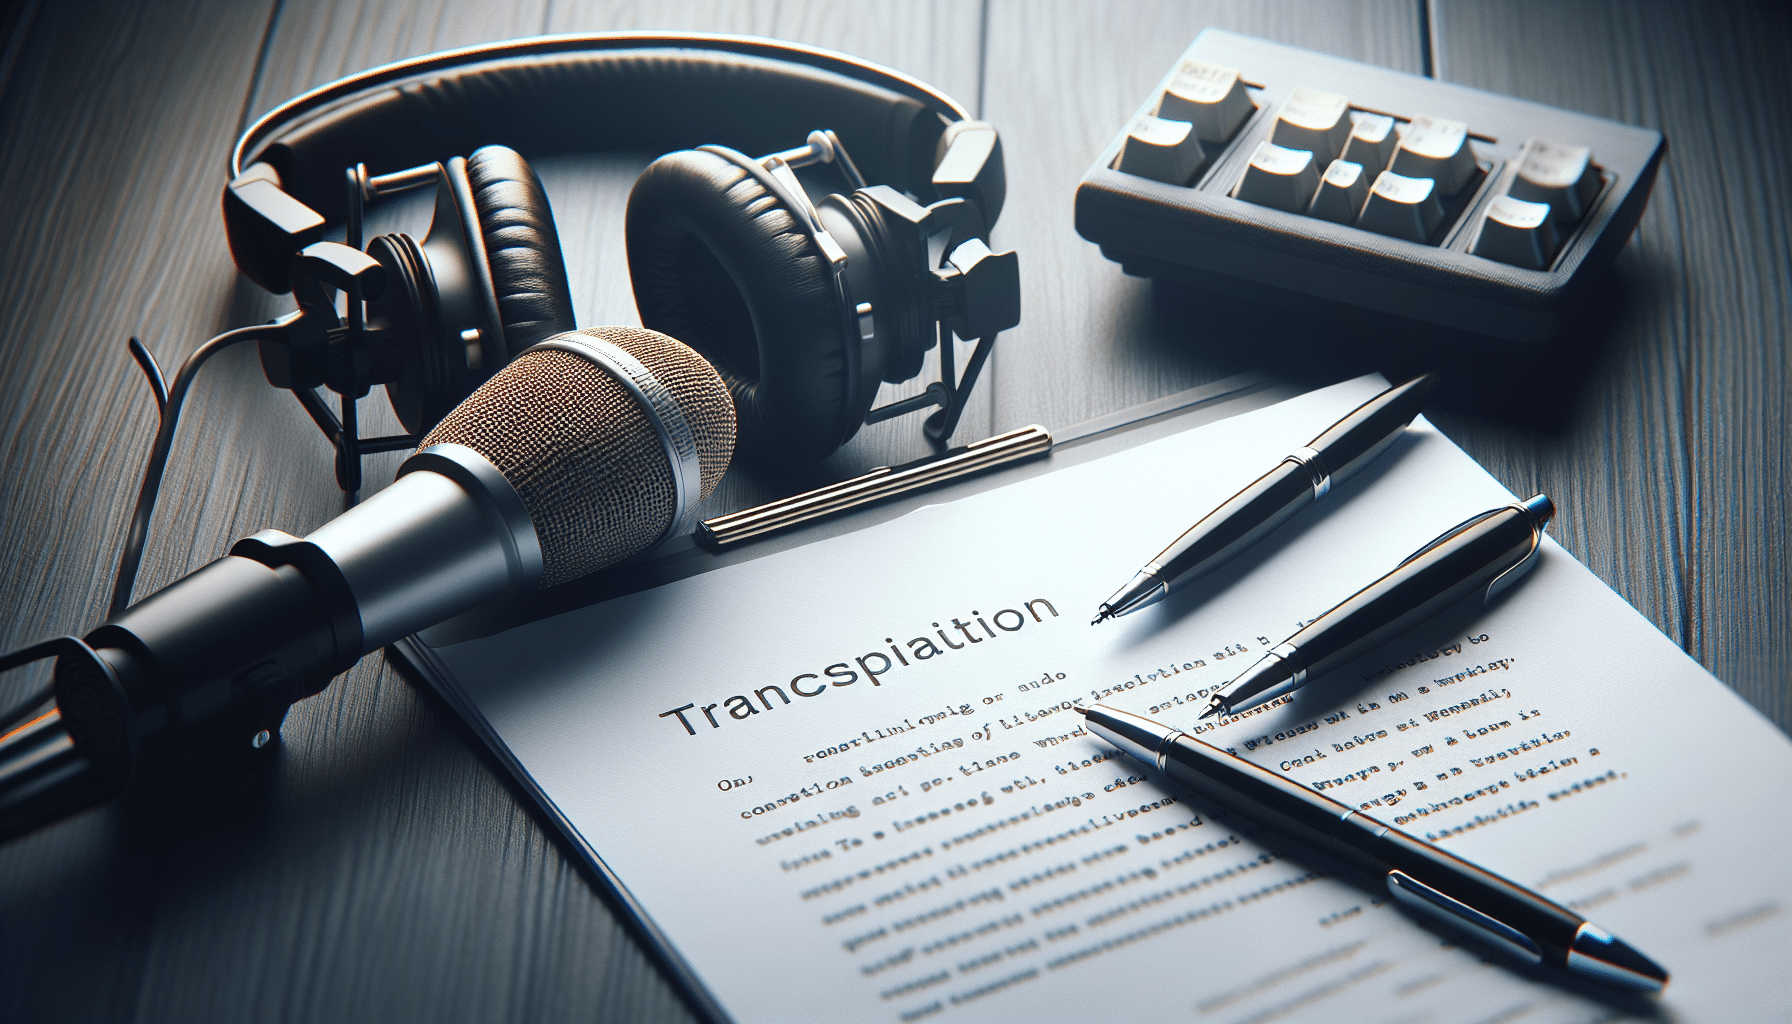 Transcription work: Converting audio or video into written documents